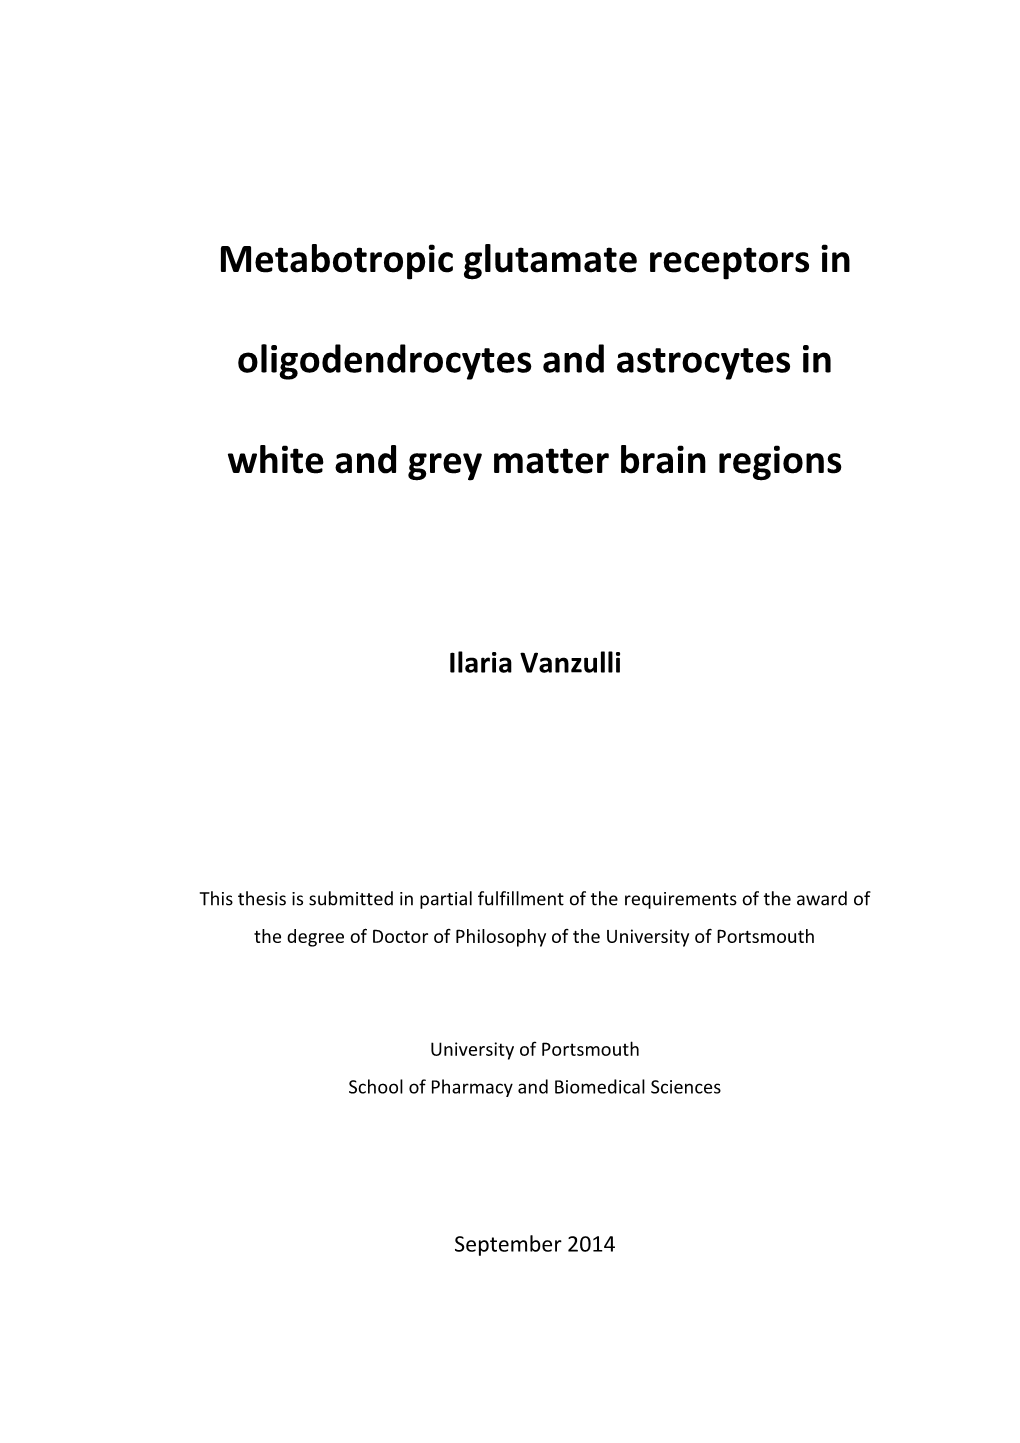 Metabotropic Glutamate Receptors in Oligodendrocytes and Astrocytes in White and Grey Matter Brain Regions